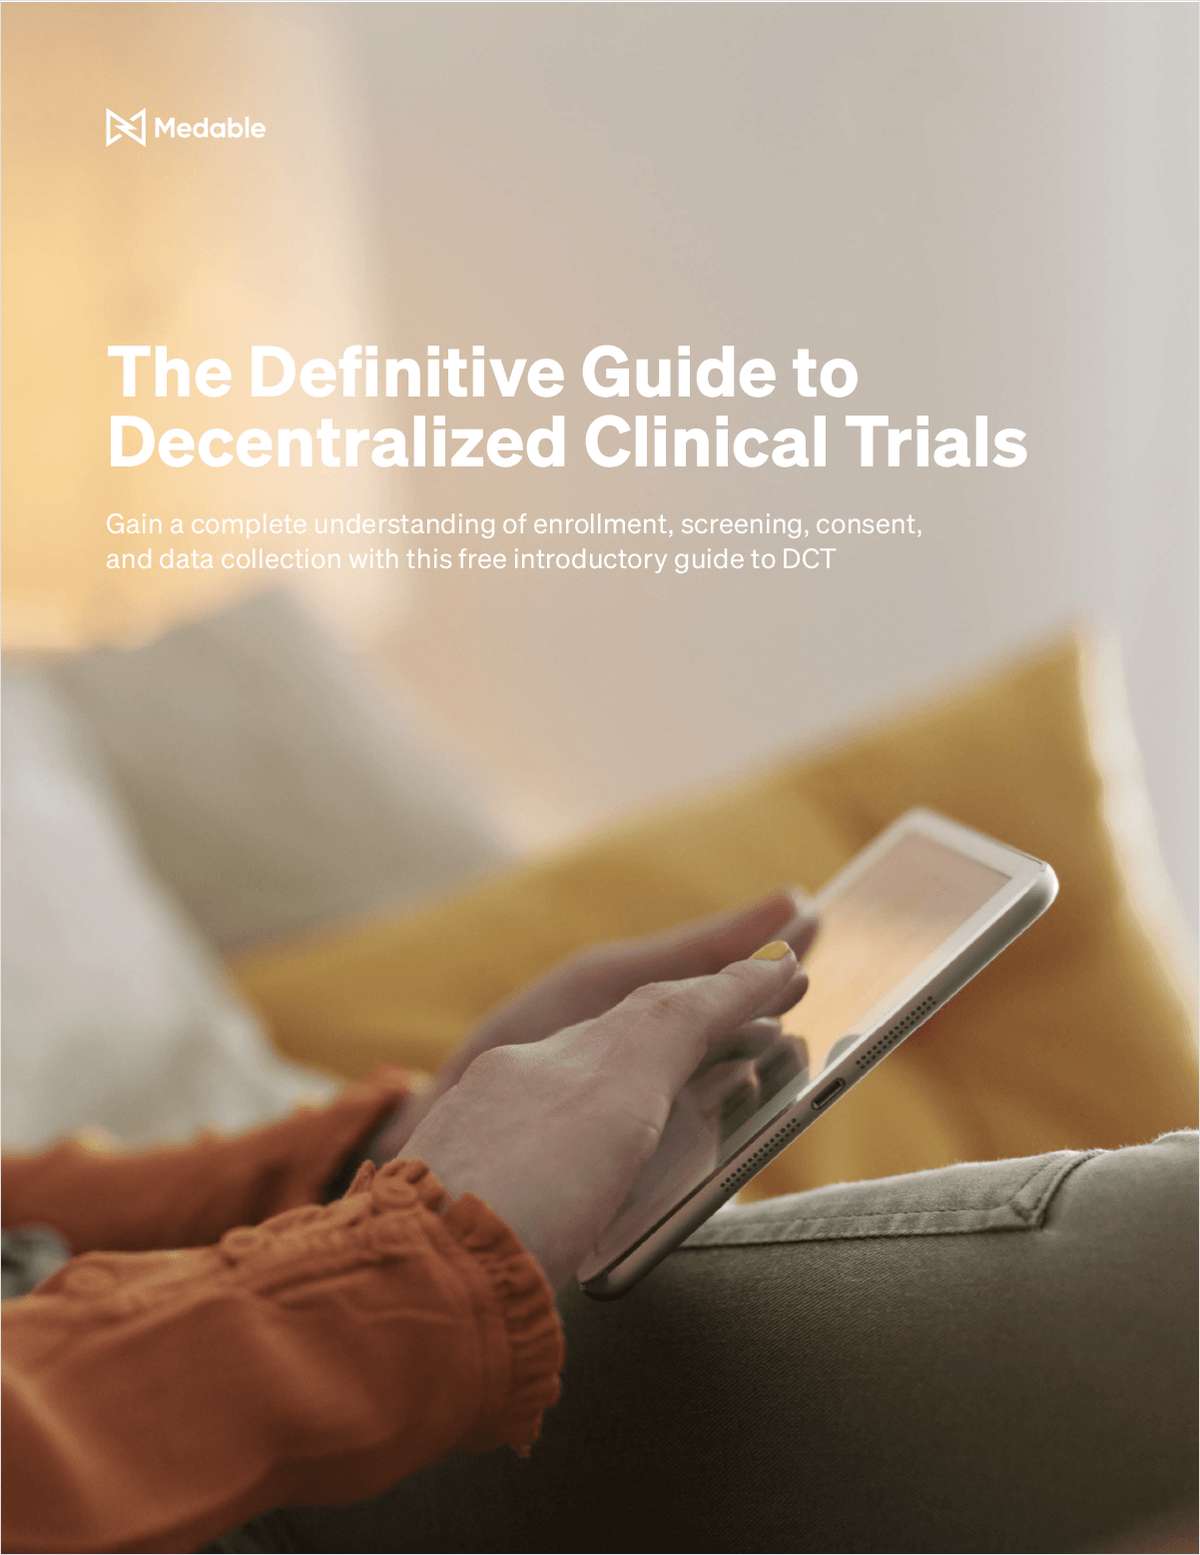 The Definitive Guide to Decentralized Clinical Trials